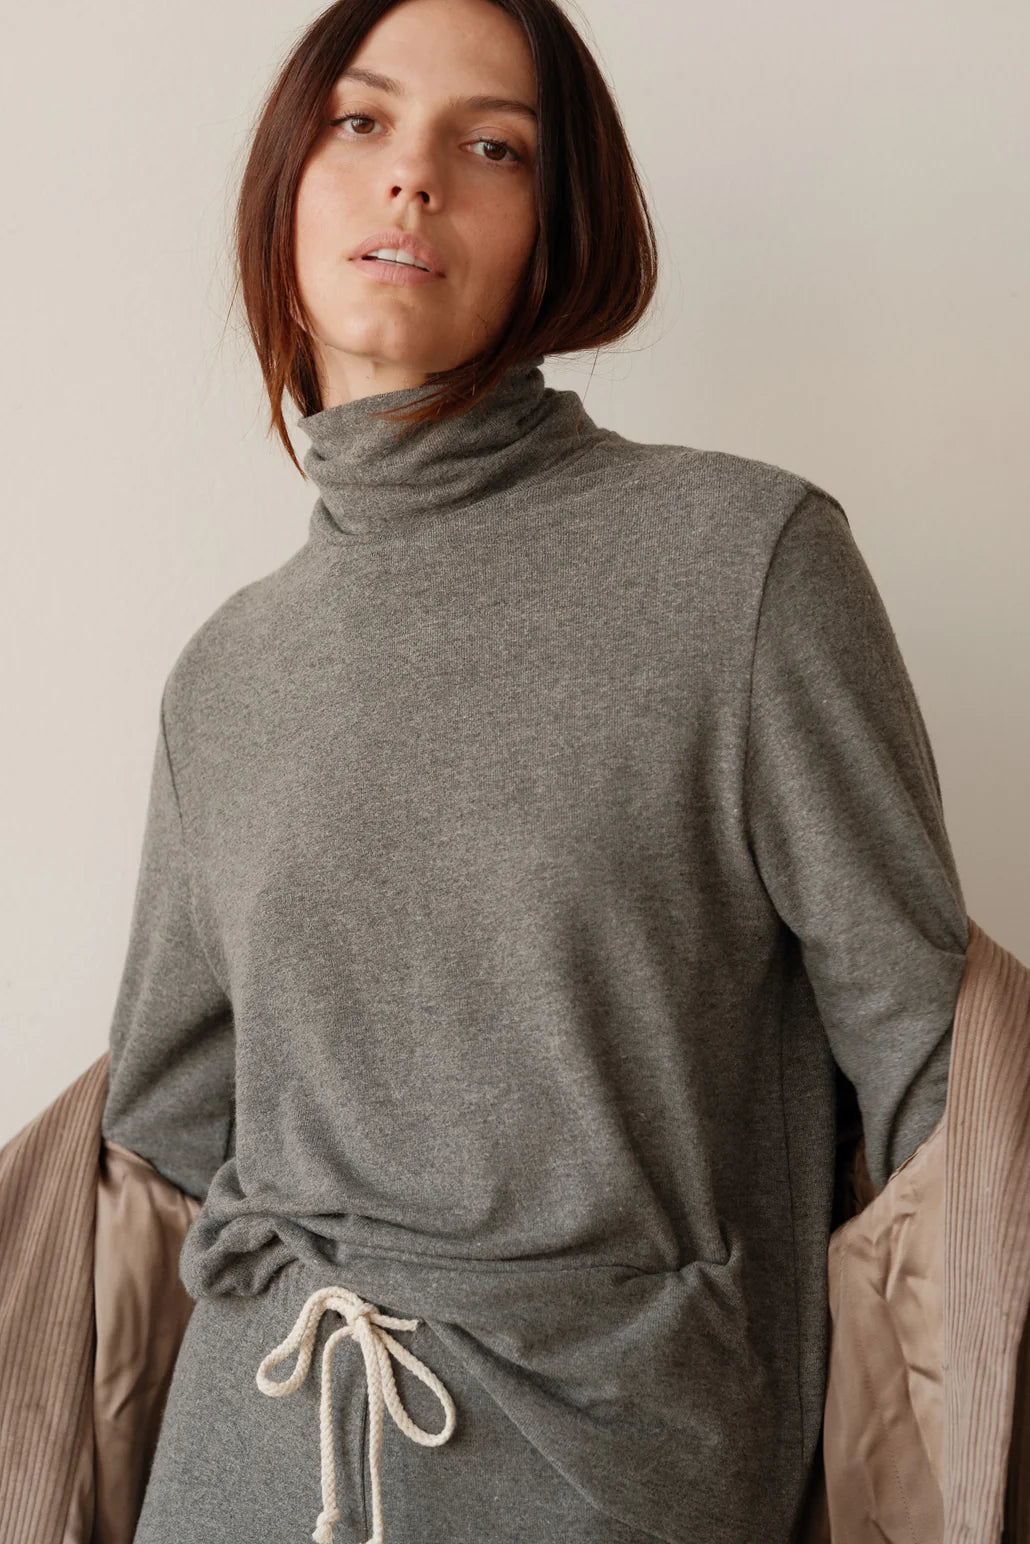 A medium close up image of a female model posing while wearing the Sweater Turtleneck in Charcoal Grey styled with a corduroy shirt draped over her arms